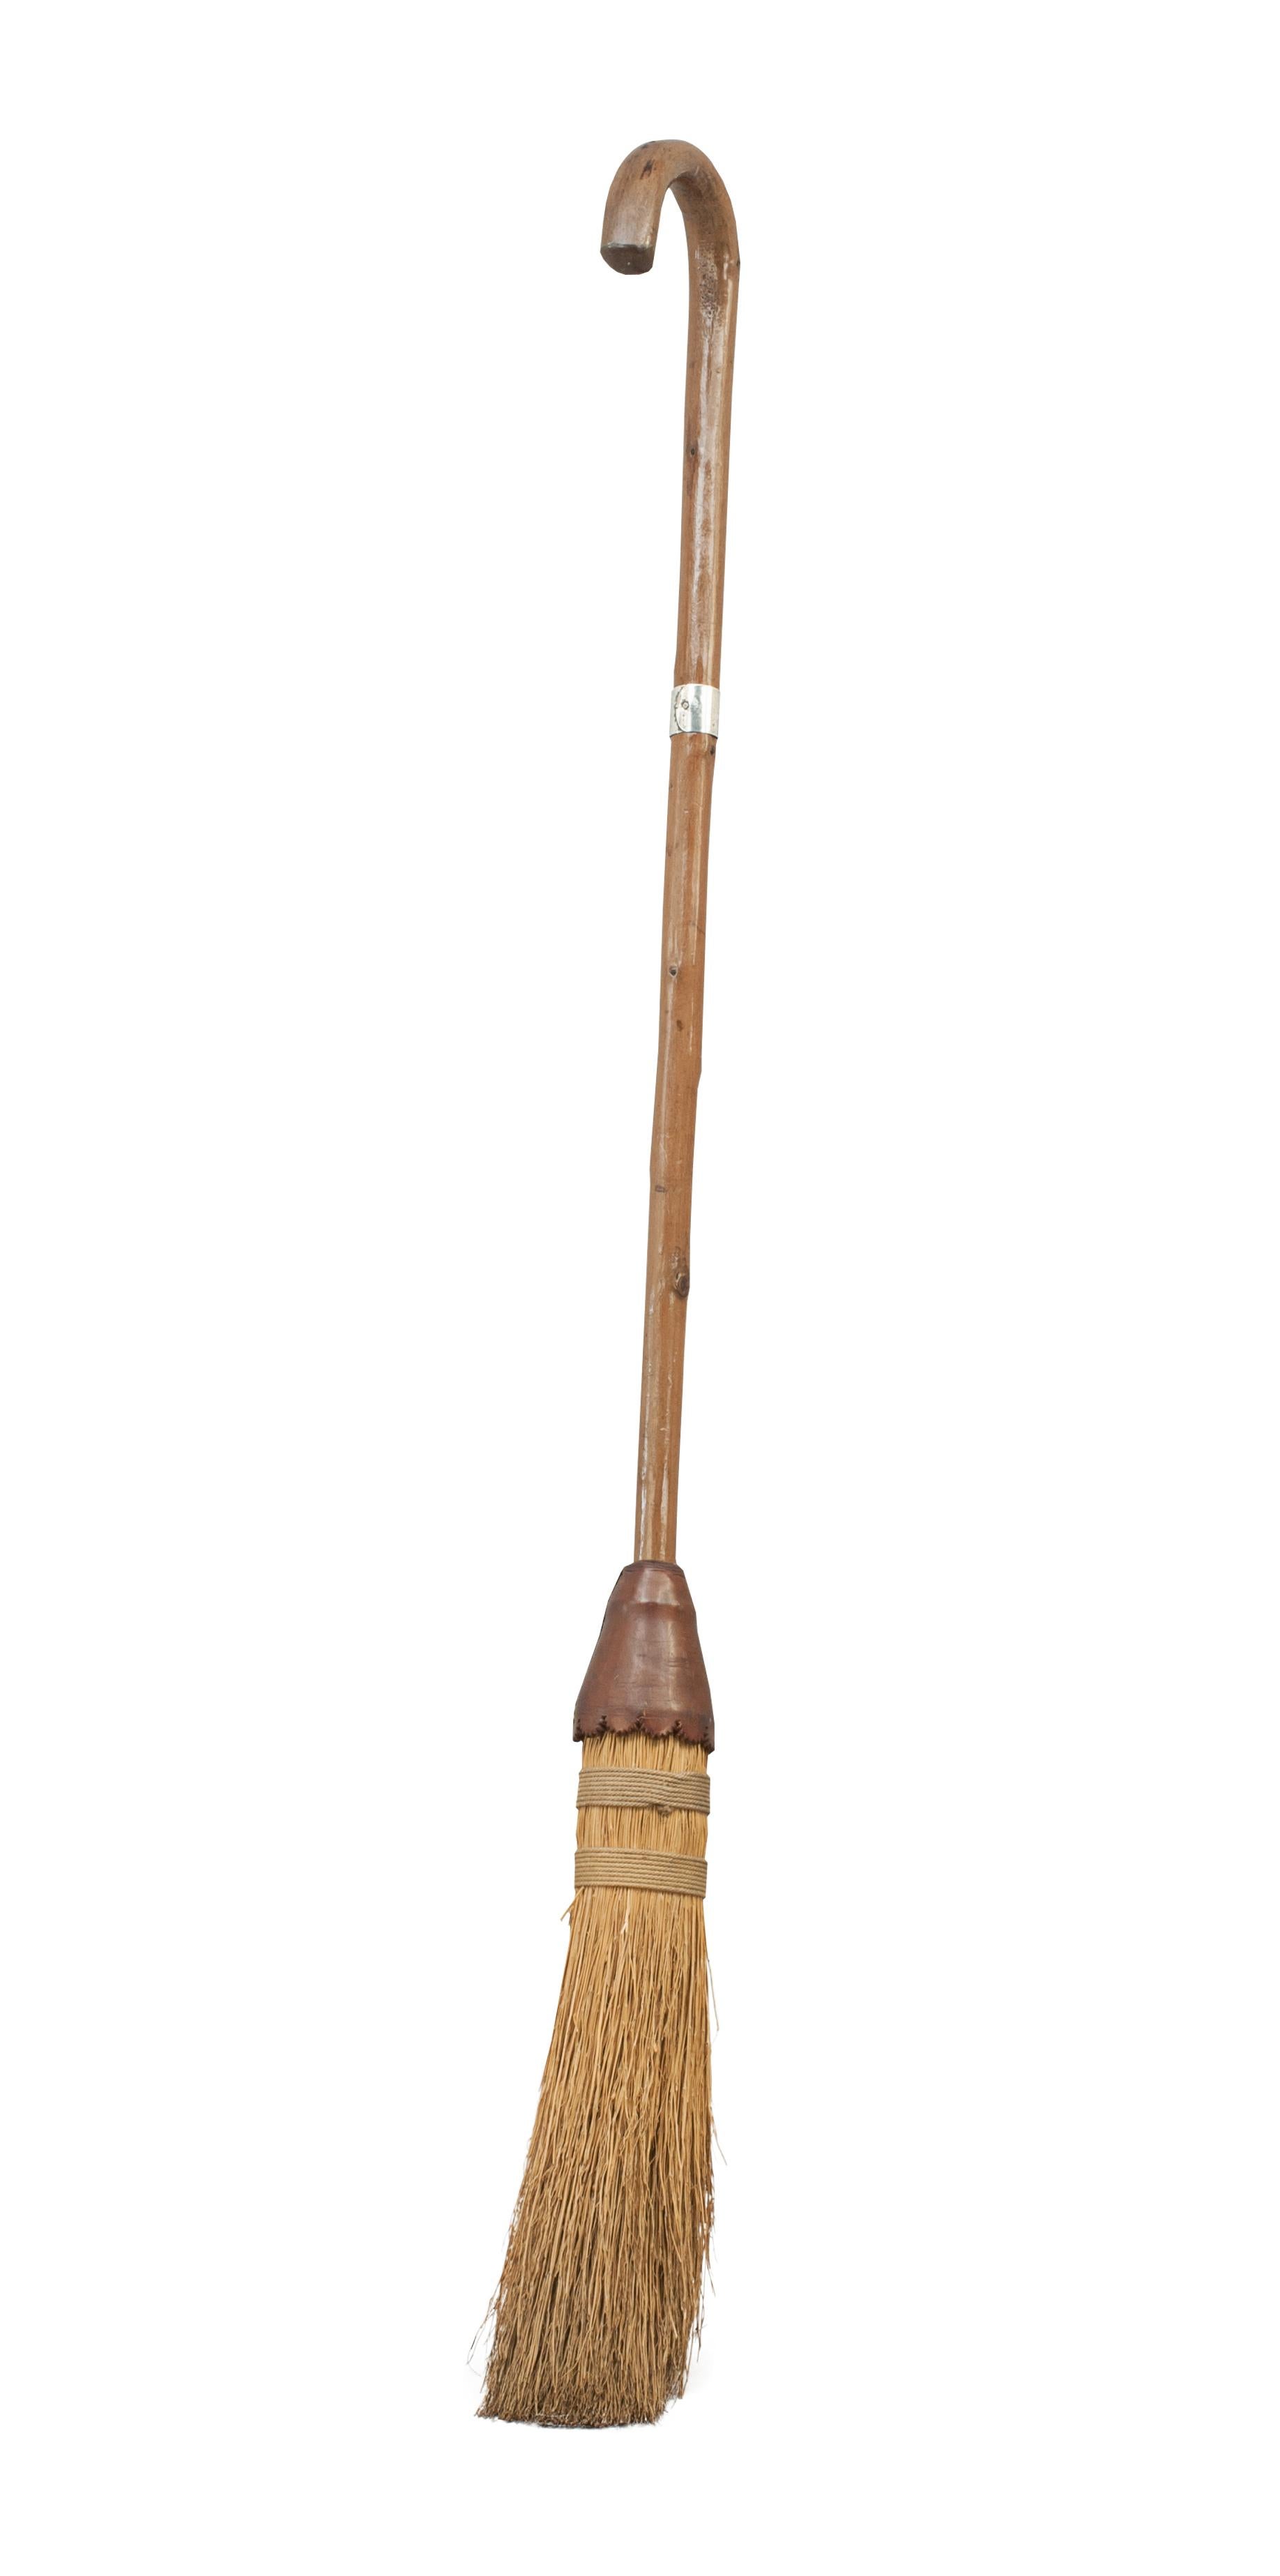 Vintage Curling Besom.
A scarce curling besom, brush or broom with a briarwood handle with an engraved silver band. The besom was awarded as a tournament prize and the engraving reads 